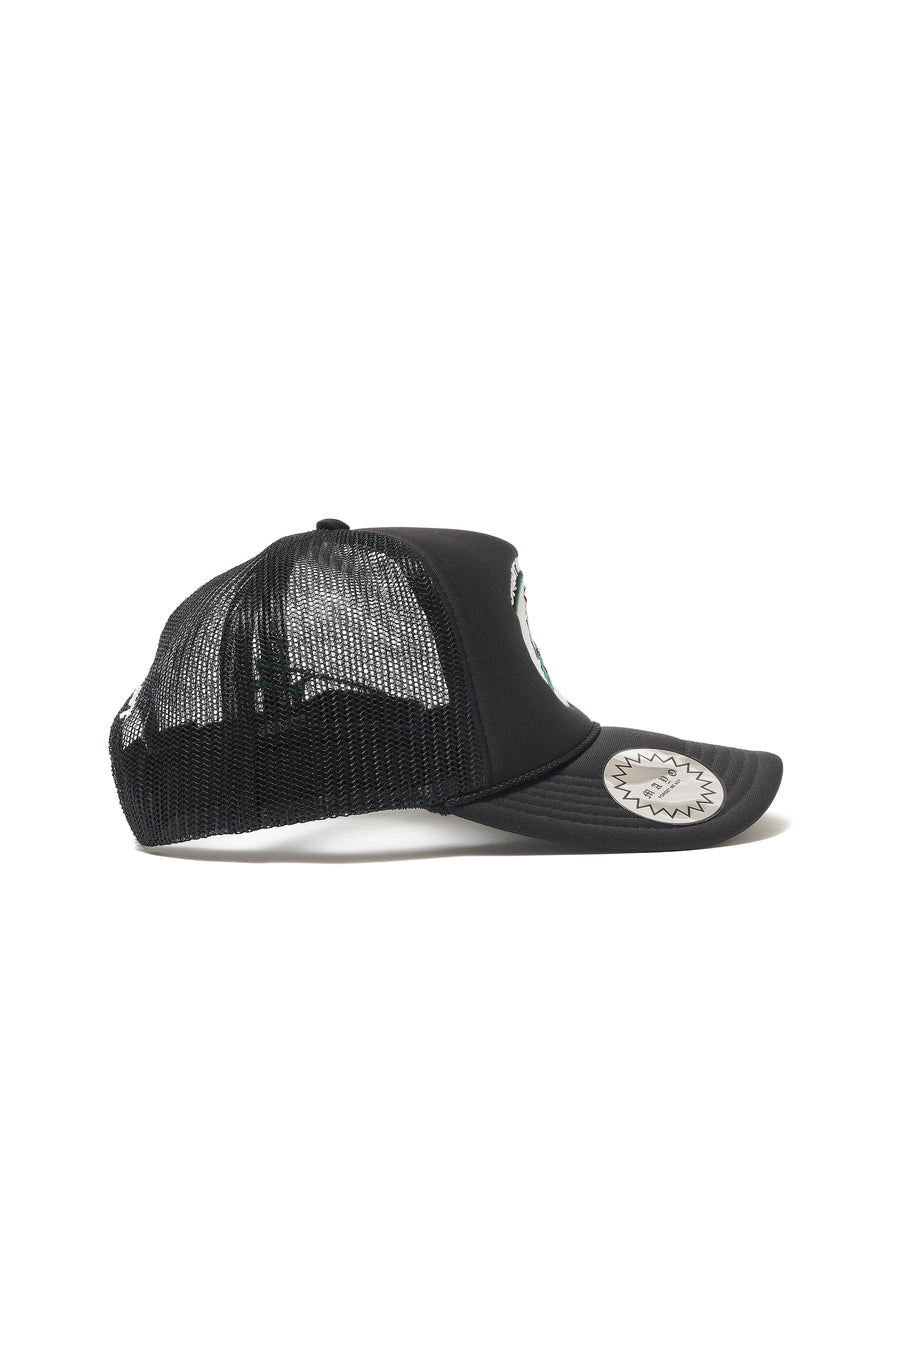 MAYO RAT FORGET ME NOT Embroidery Mesh CAP - BLACK